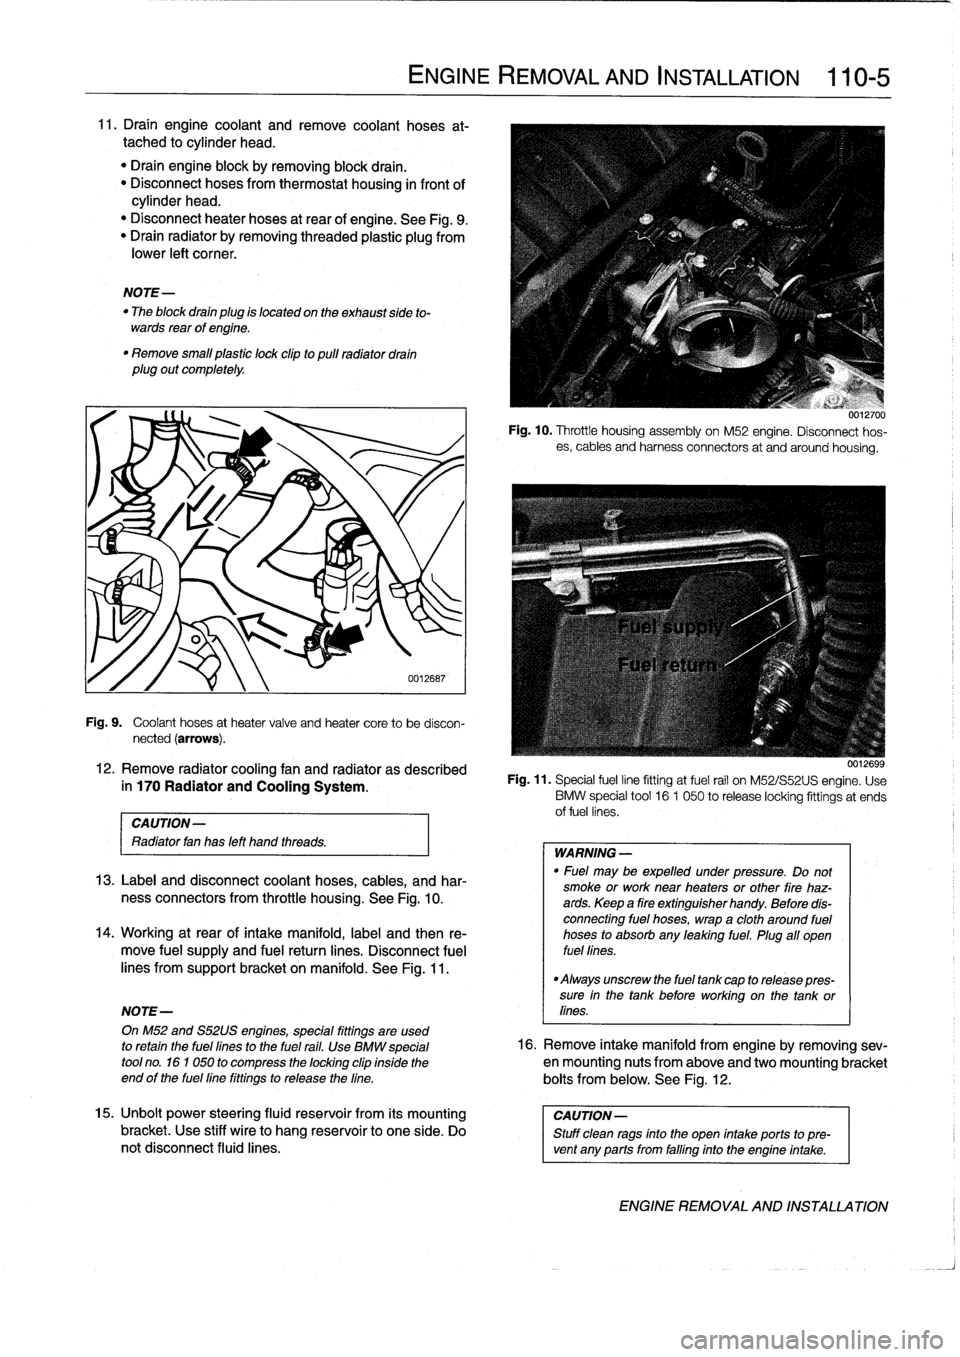 BMW 323i 1998 E36 Workshop Manual 
11
.
Draín
engine
coolant
and
Rmove
coolant
hoses
at-
tached
to
cylinder
head
.

"
Drain
engine
block
byremoving
block
drain
.
"
Disconnect
hoses
from
thermostat
housing
in
front
of
cylinder
head
.
